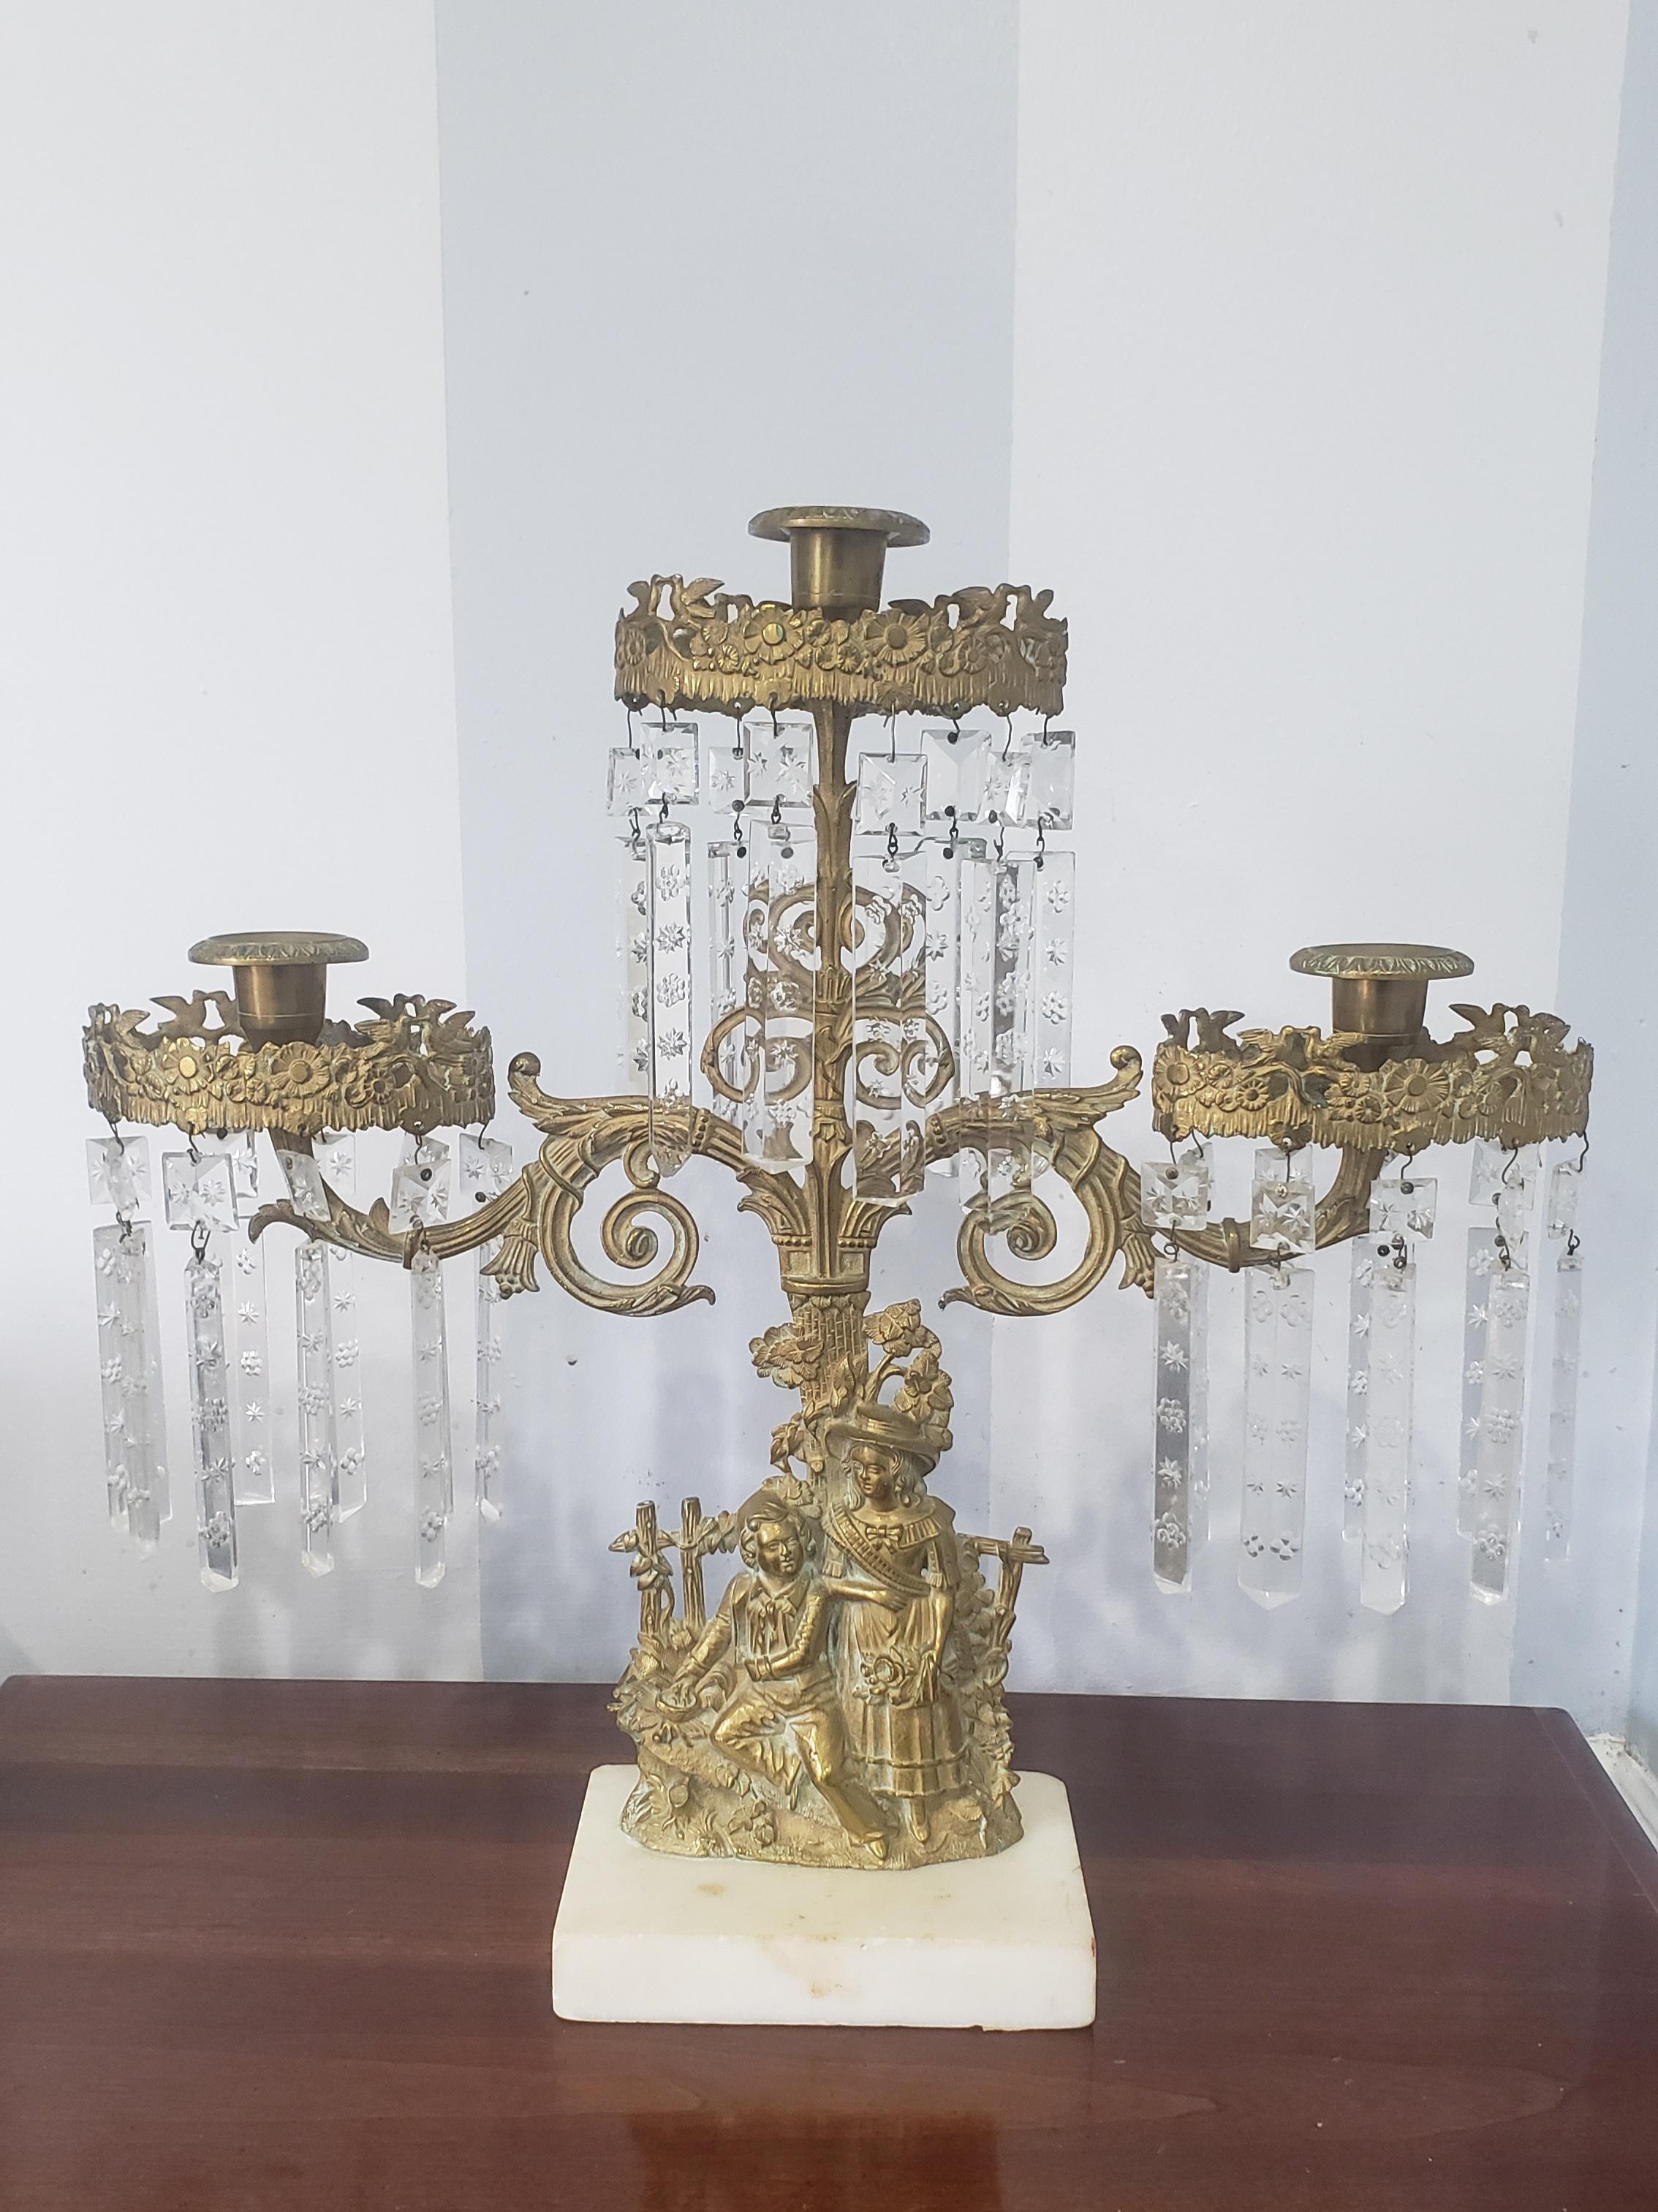 A pair of 1840s Cornelius and Co. Cast brass & marble three arms Girandole Candlelabra with crystal pendulums.
Measures 16.25